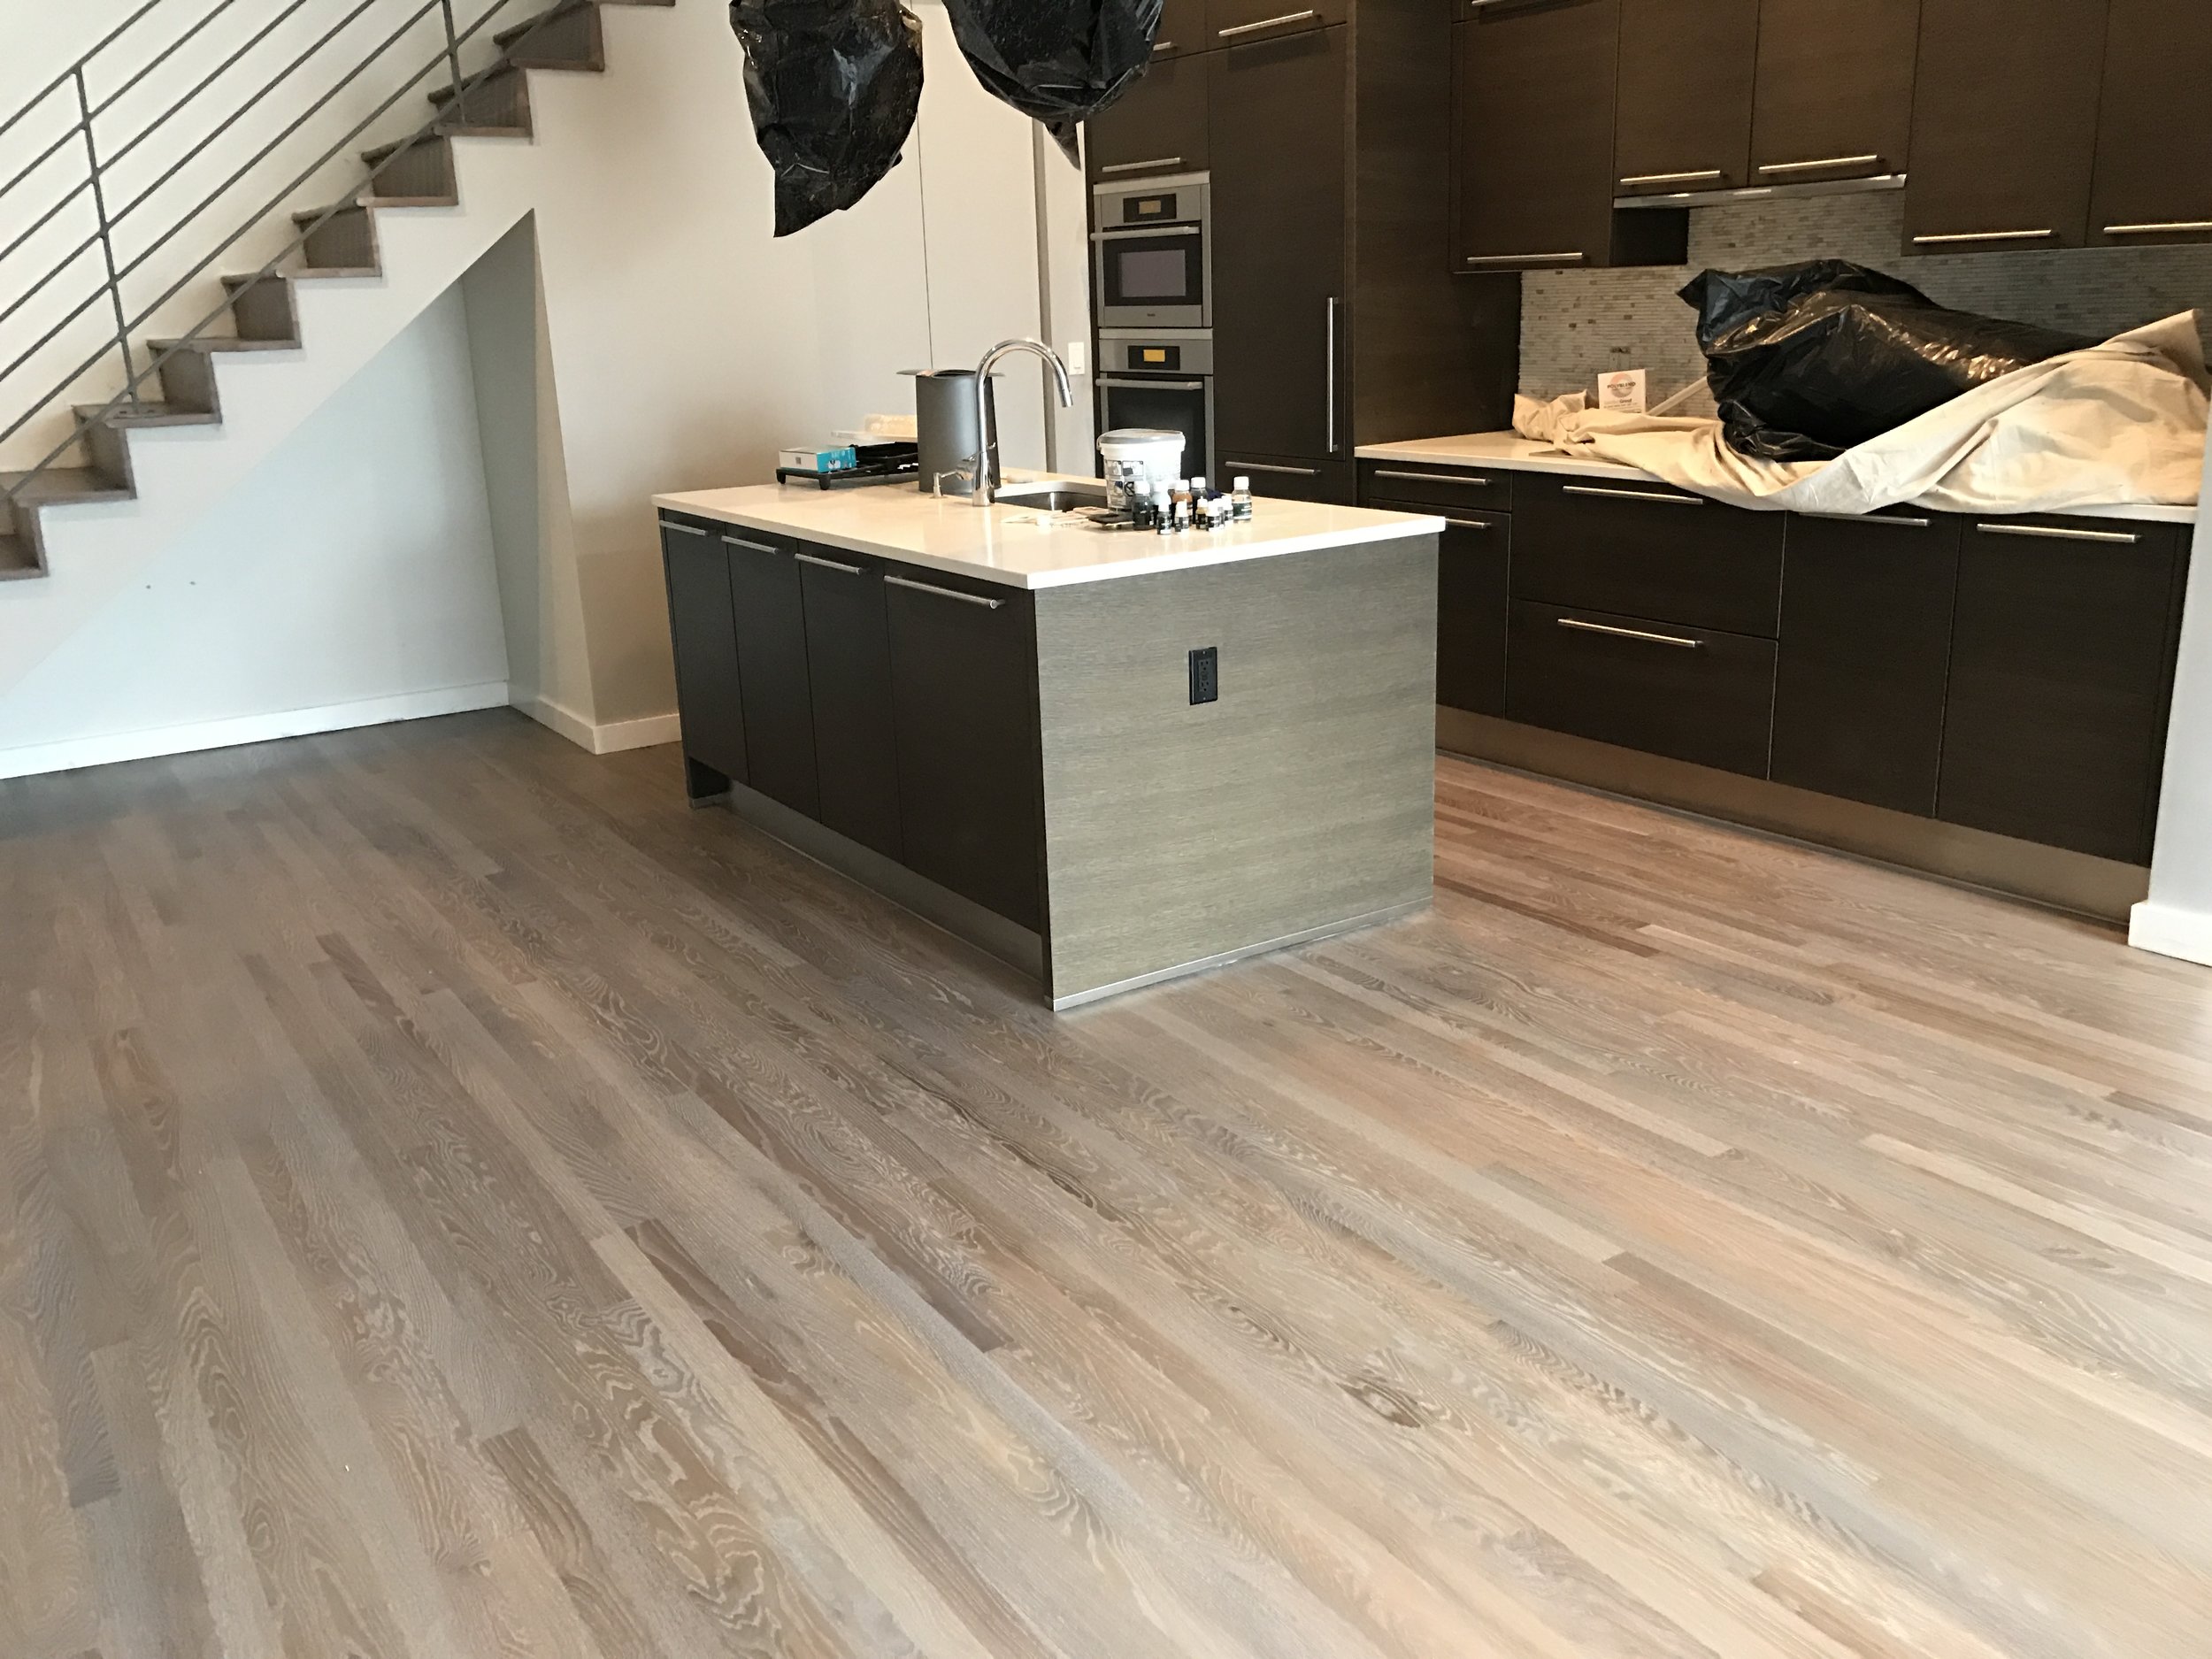 Rubio Monocoat Residential Wood Flooring Products - Denver